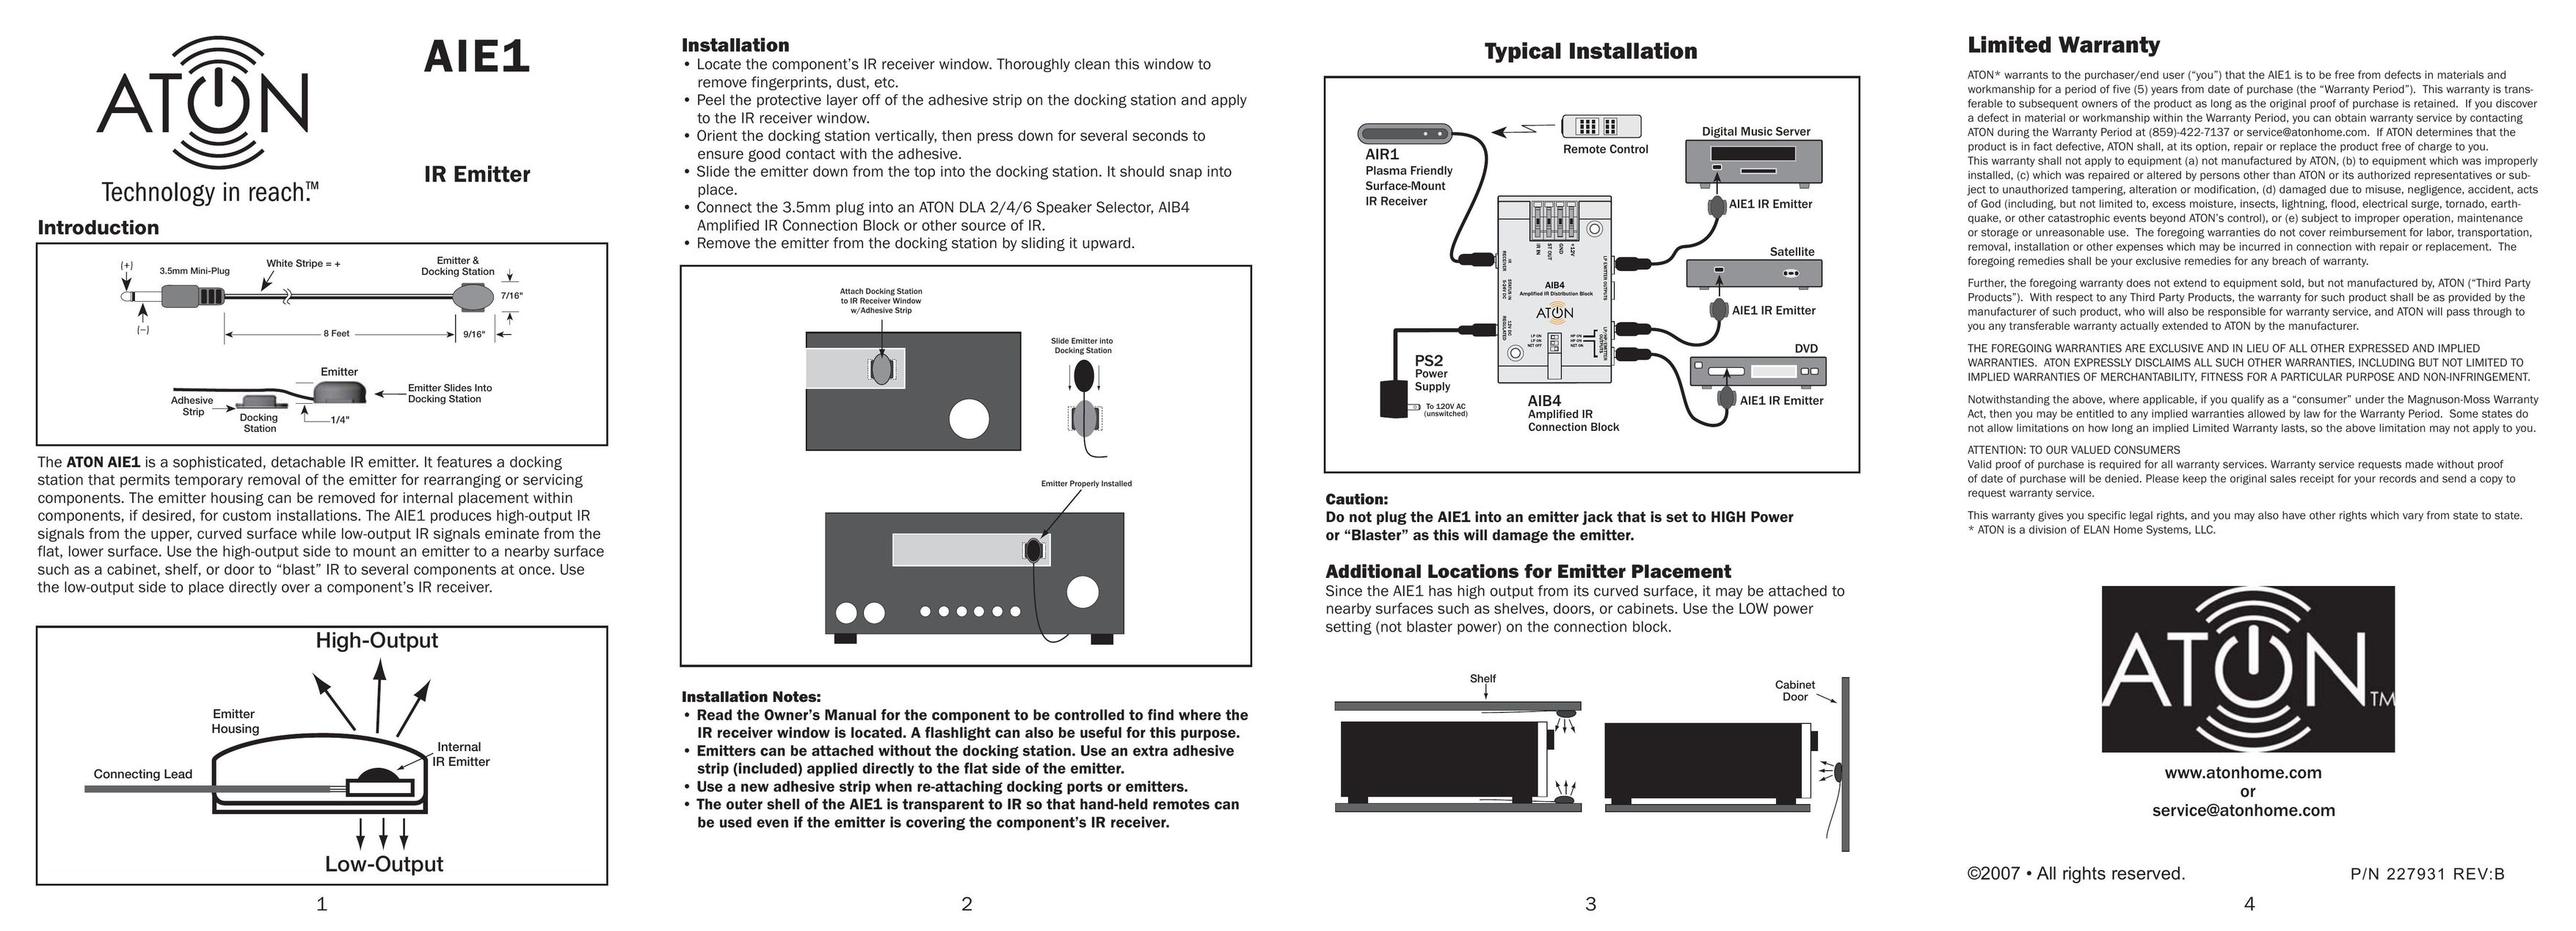 ATON AIE1 Stereo Receiver User Manual